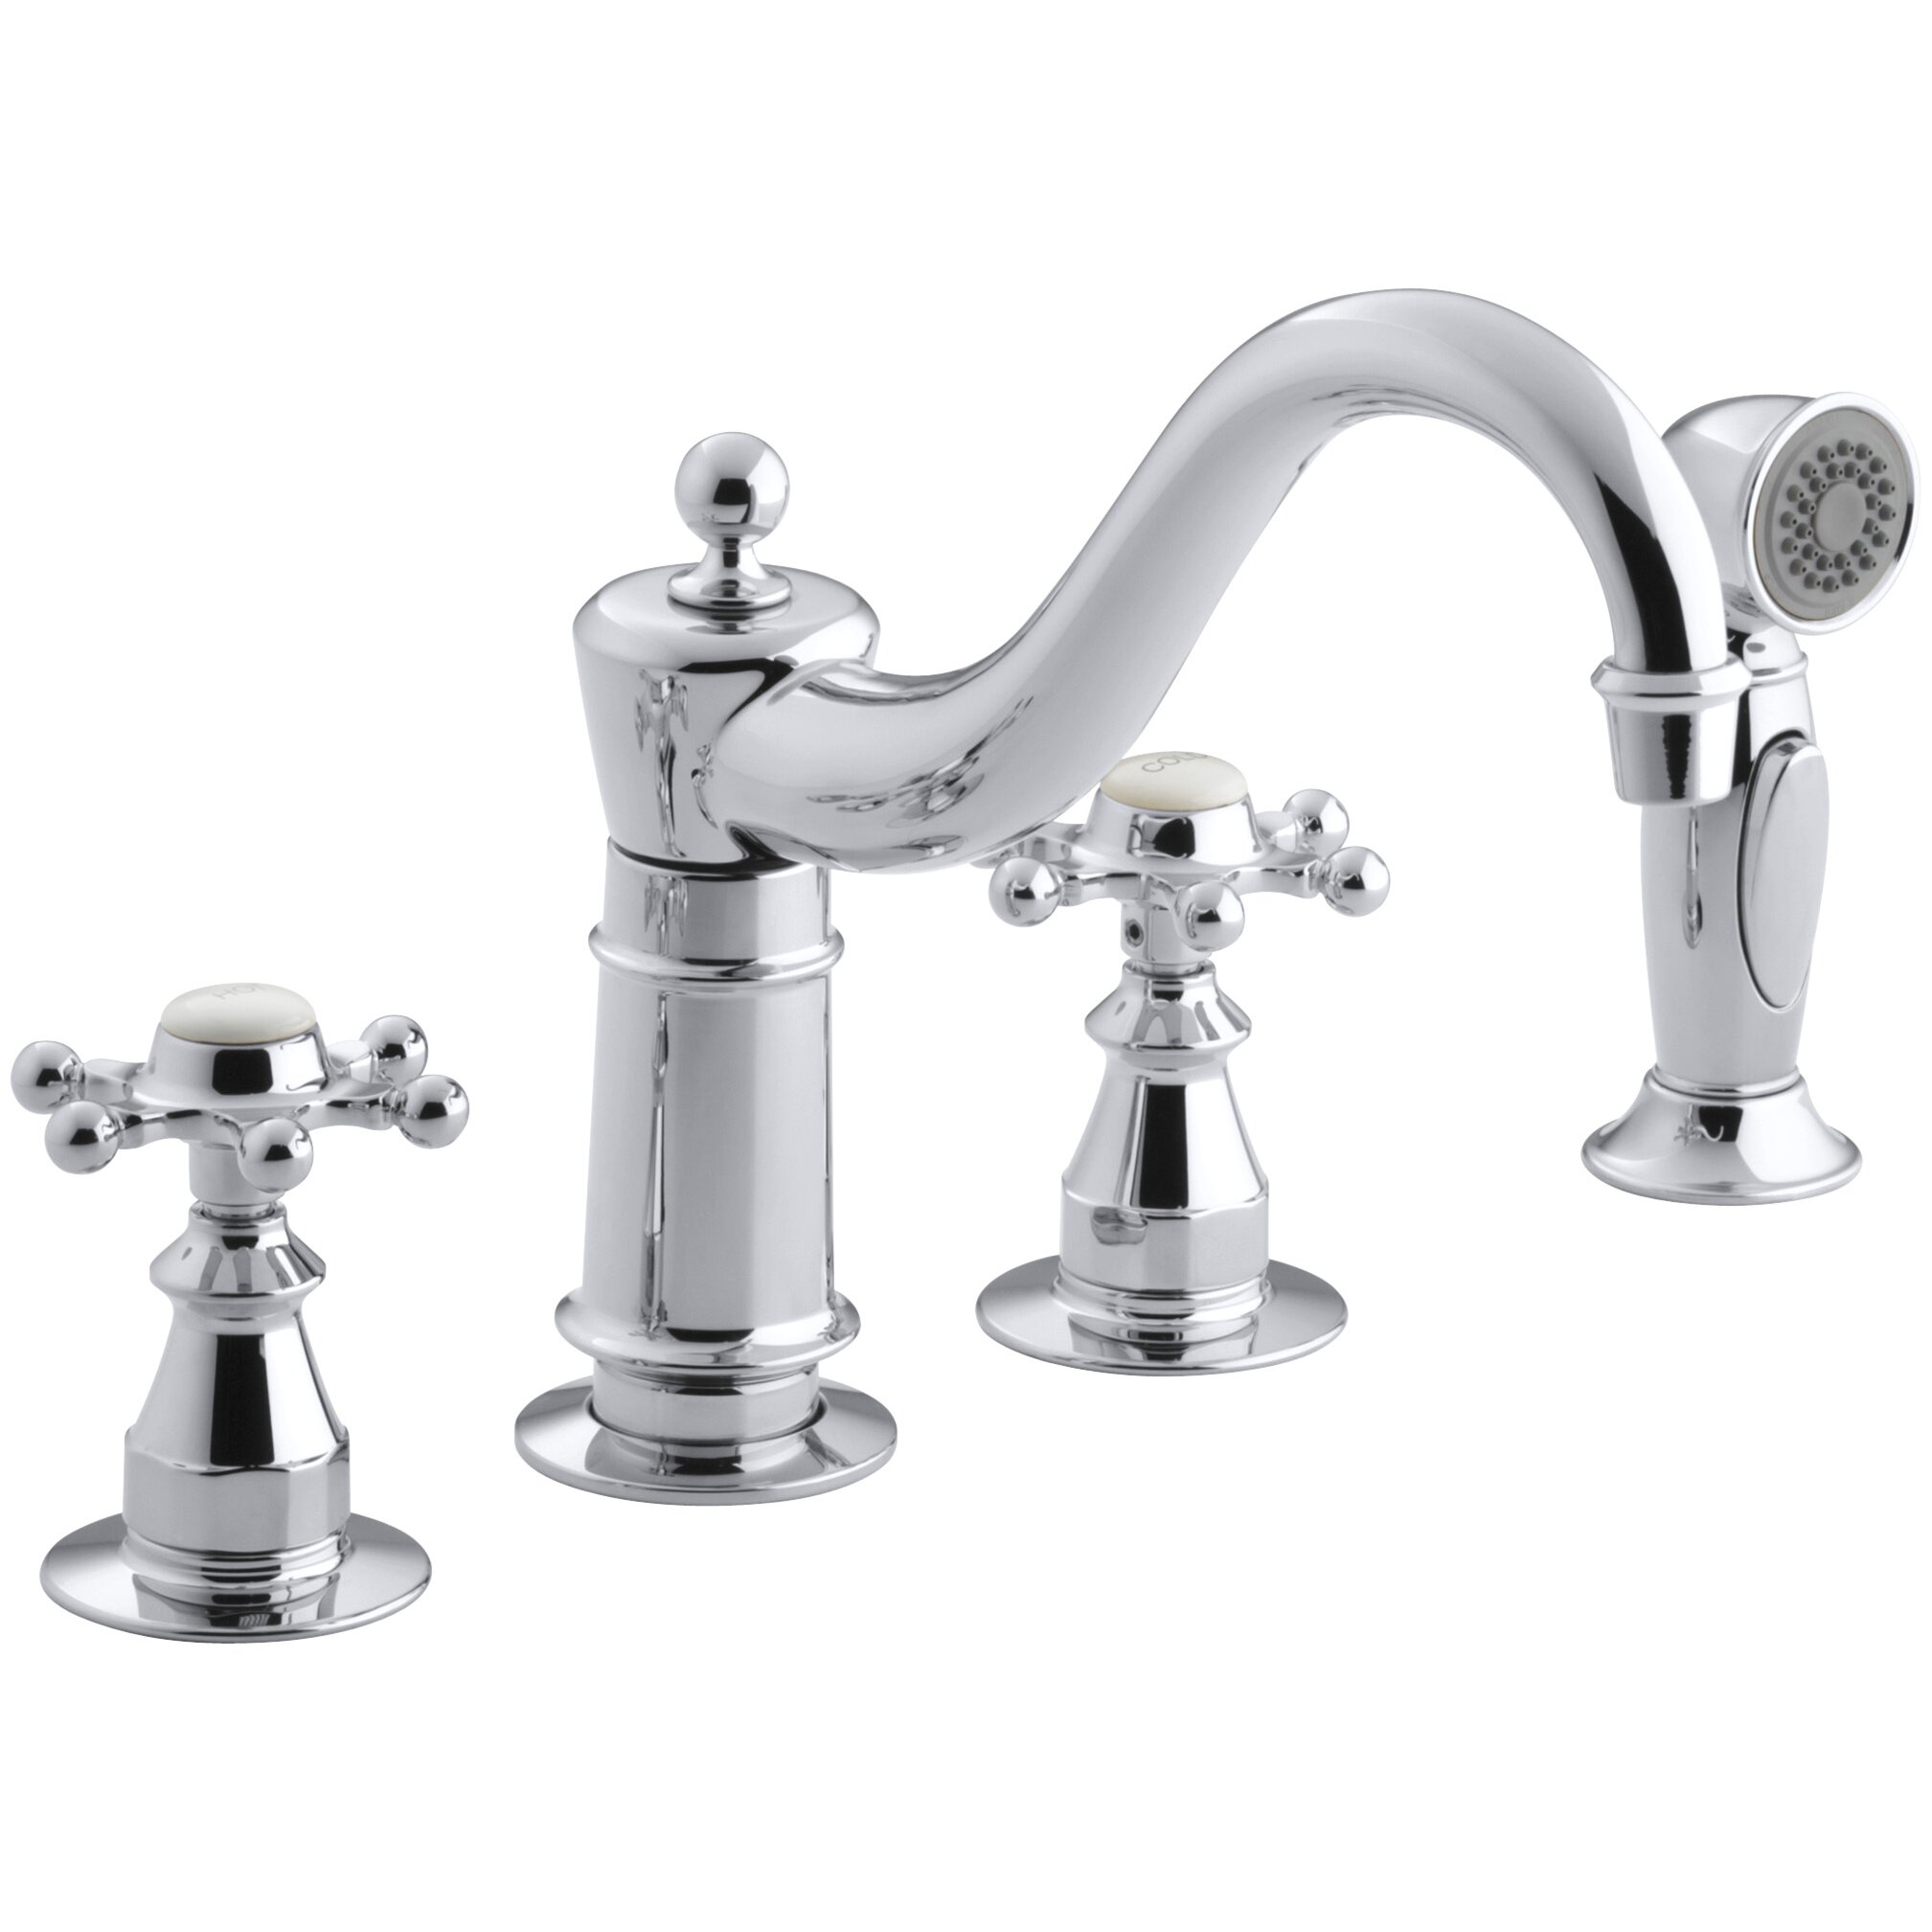 Kohler Antique Kitchen Faucet with Sidespray and Six-Prong Handles